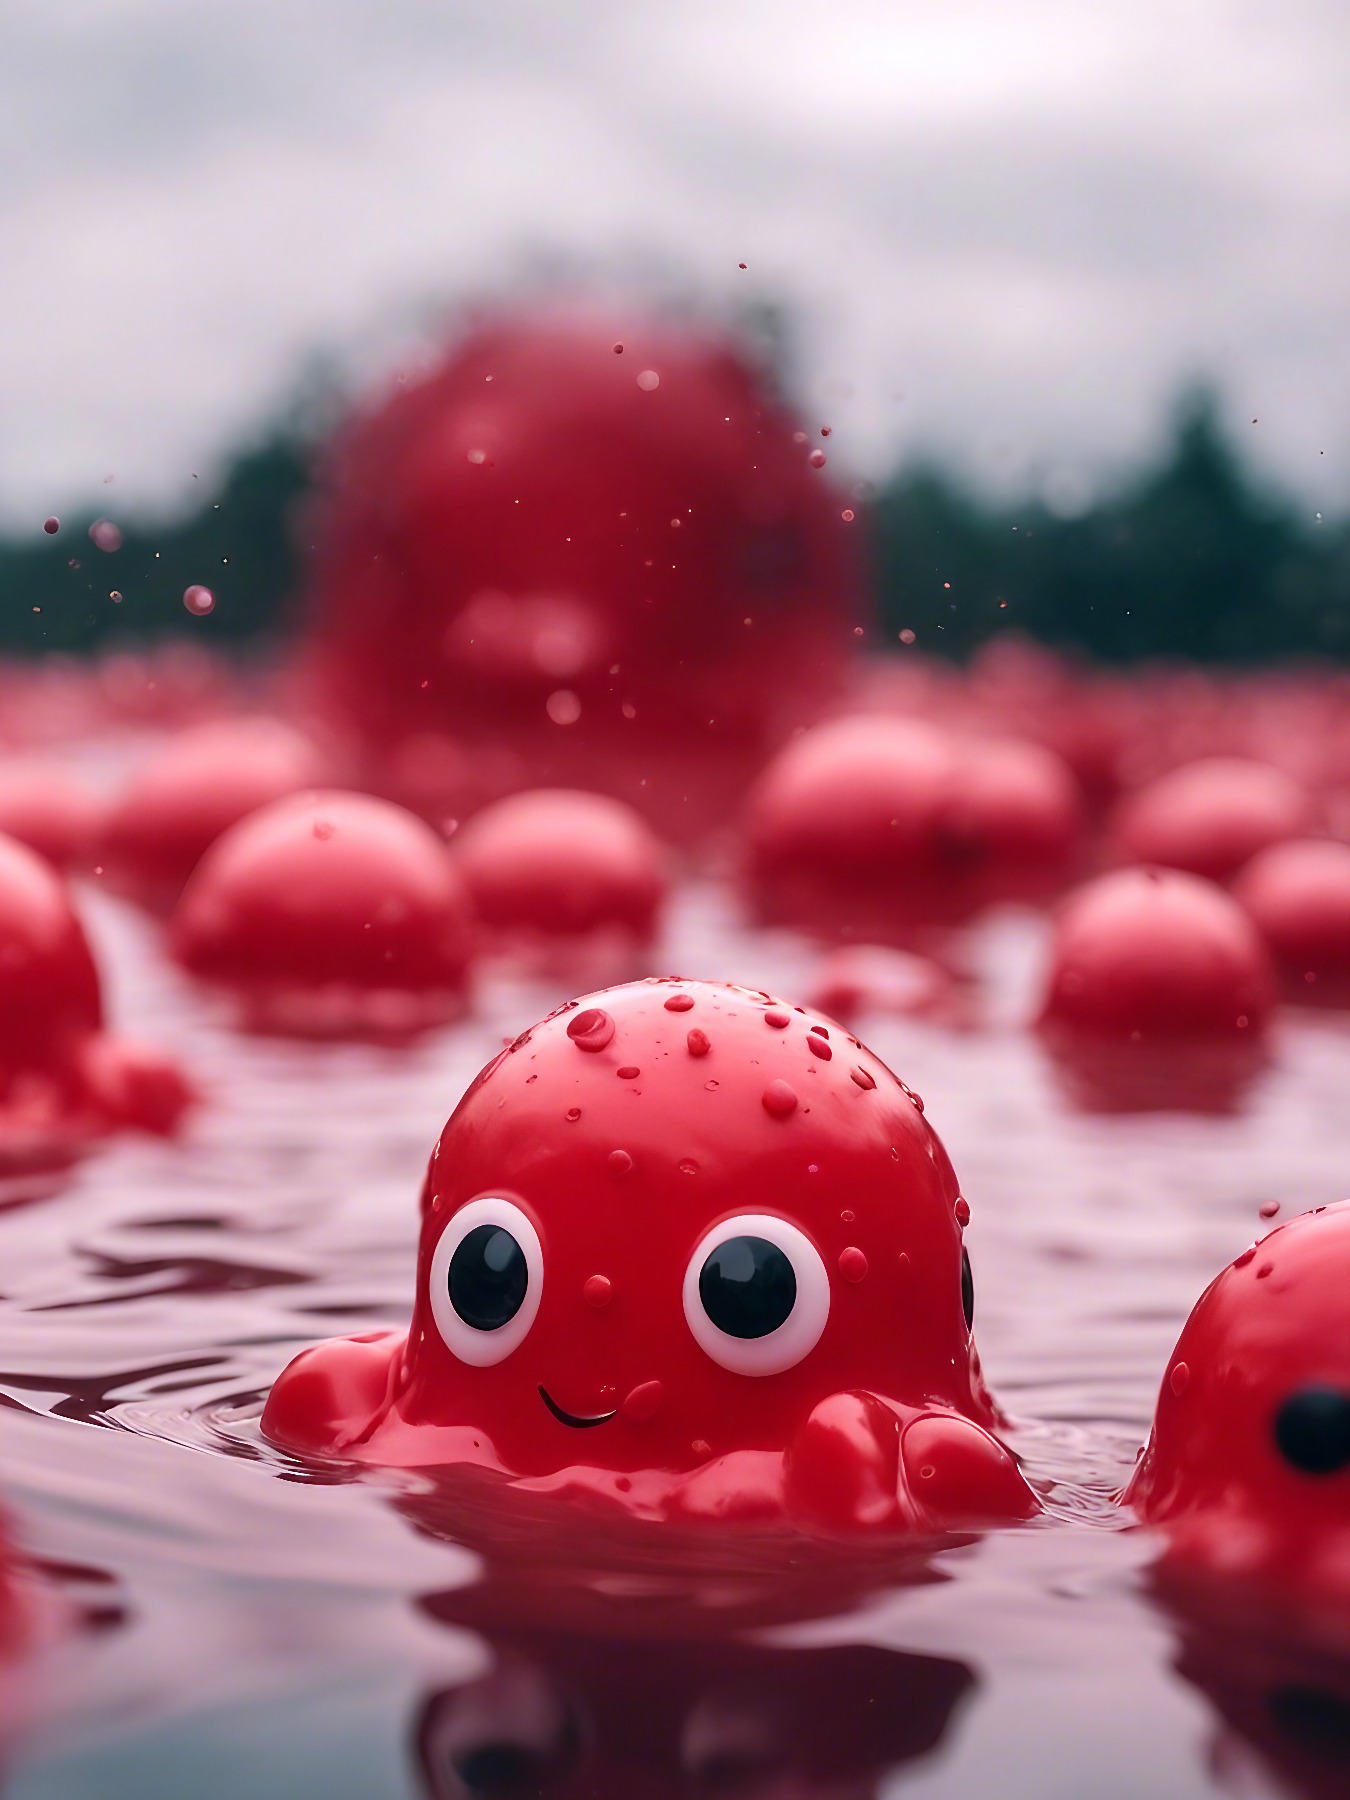 Cute red slime monsters in the lake - fantasy mini photo poster - 27x20 cm